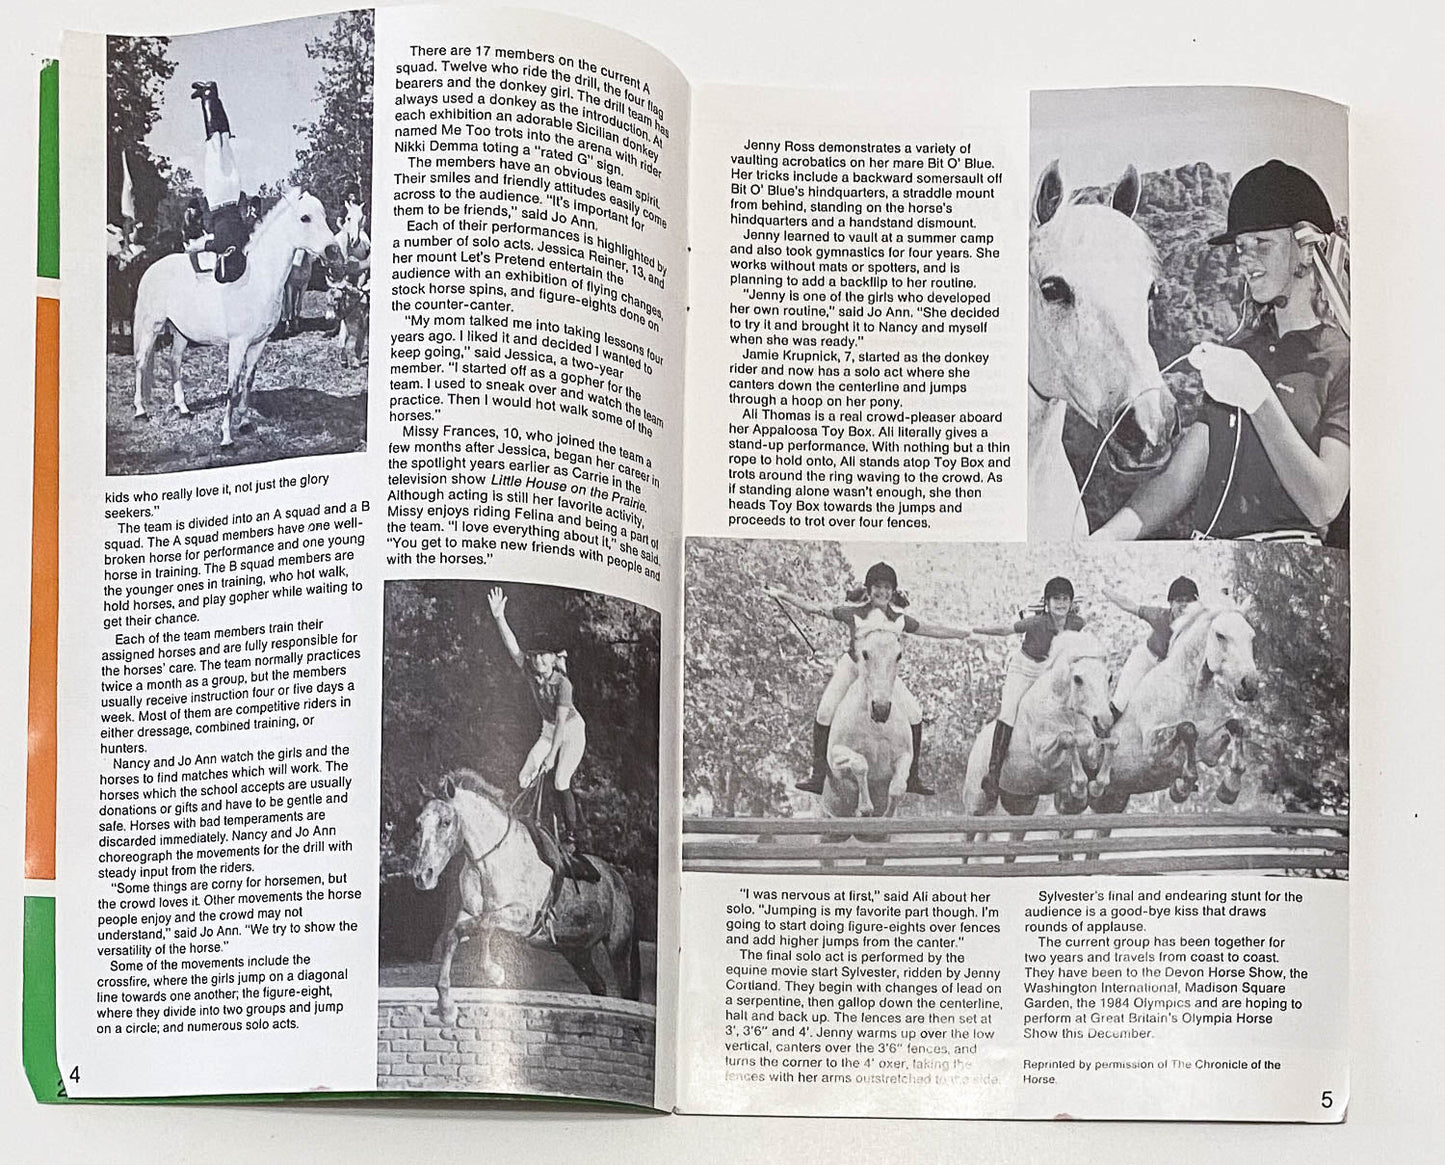 Just About Horses Magazine Vol. 14 No. 3, 1987 (Fall)